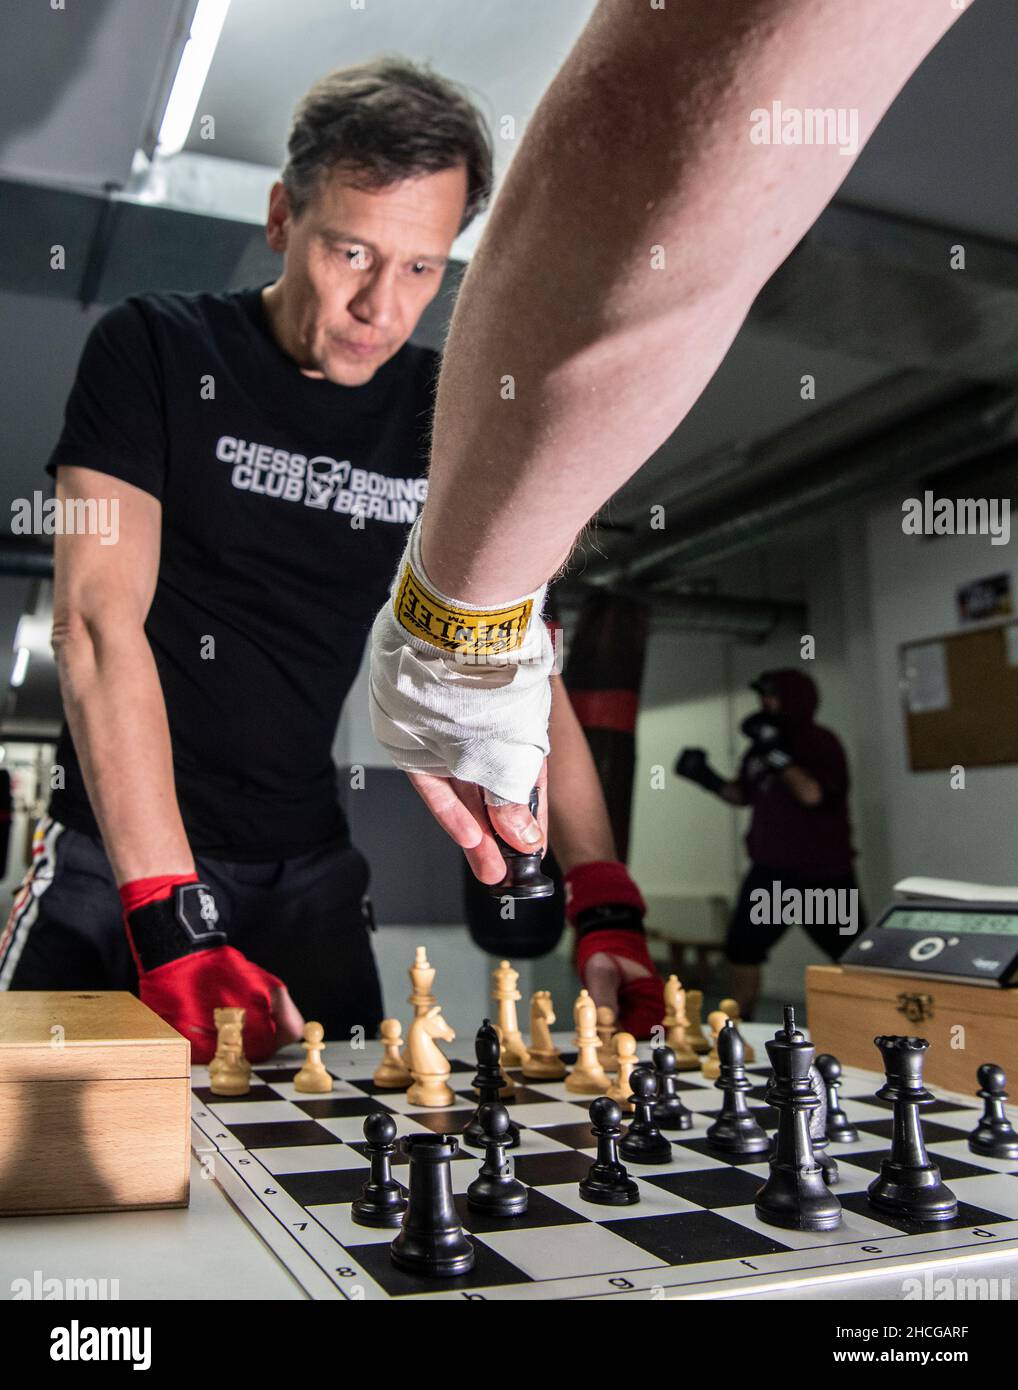 Chess In The Big Leagues, Chessboxing And Other News 